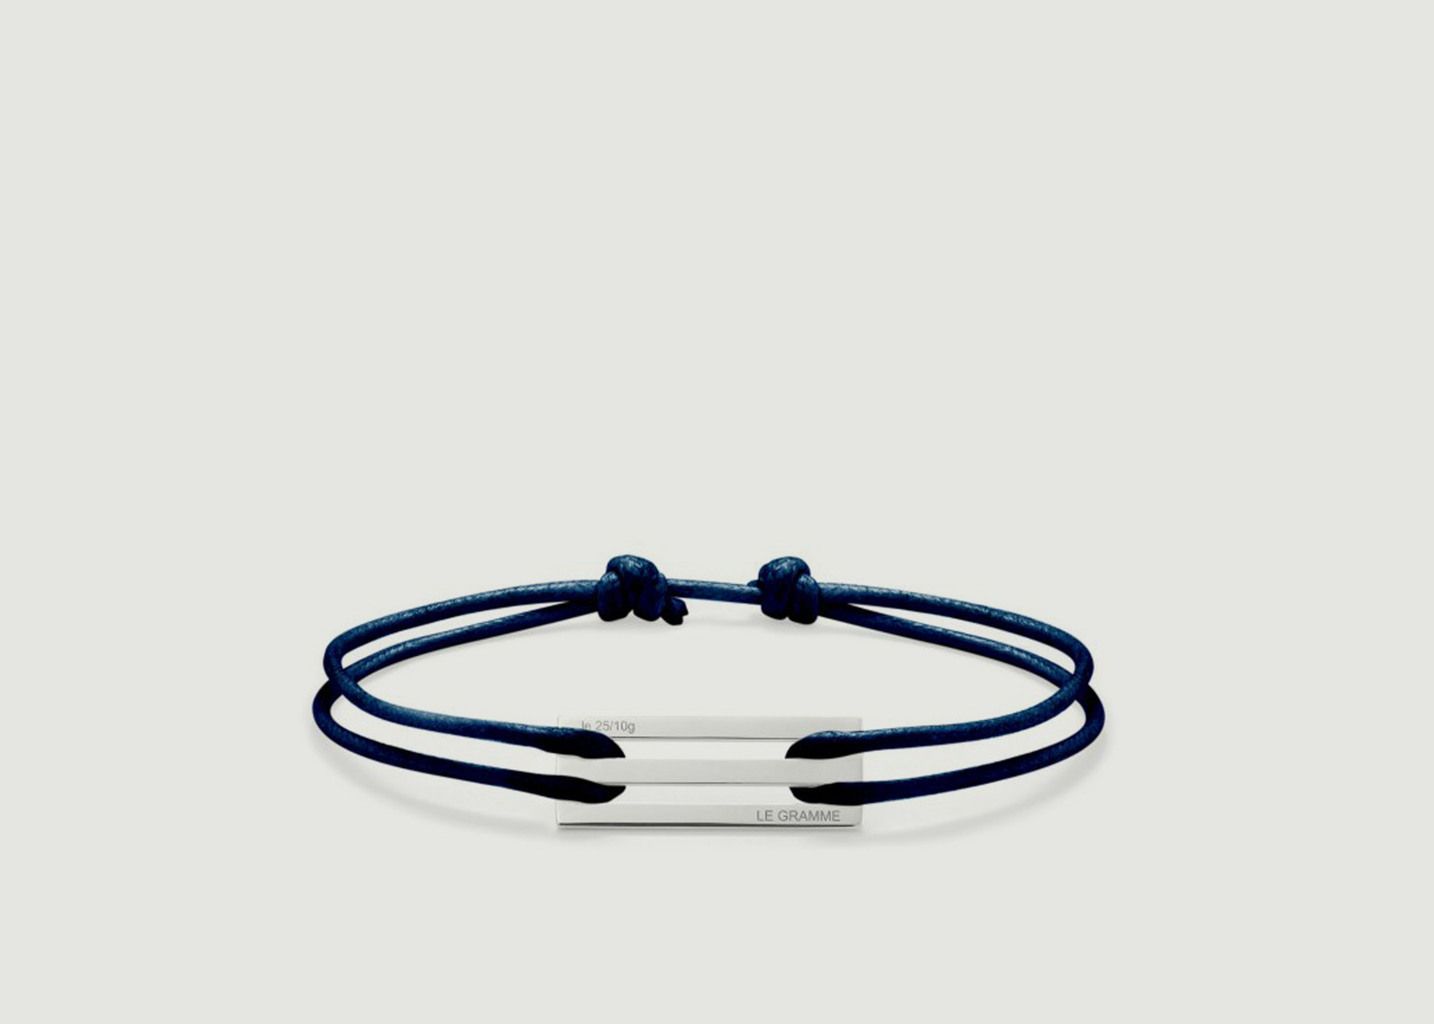 The 25/10g Cord Armband - Le Gramme